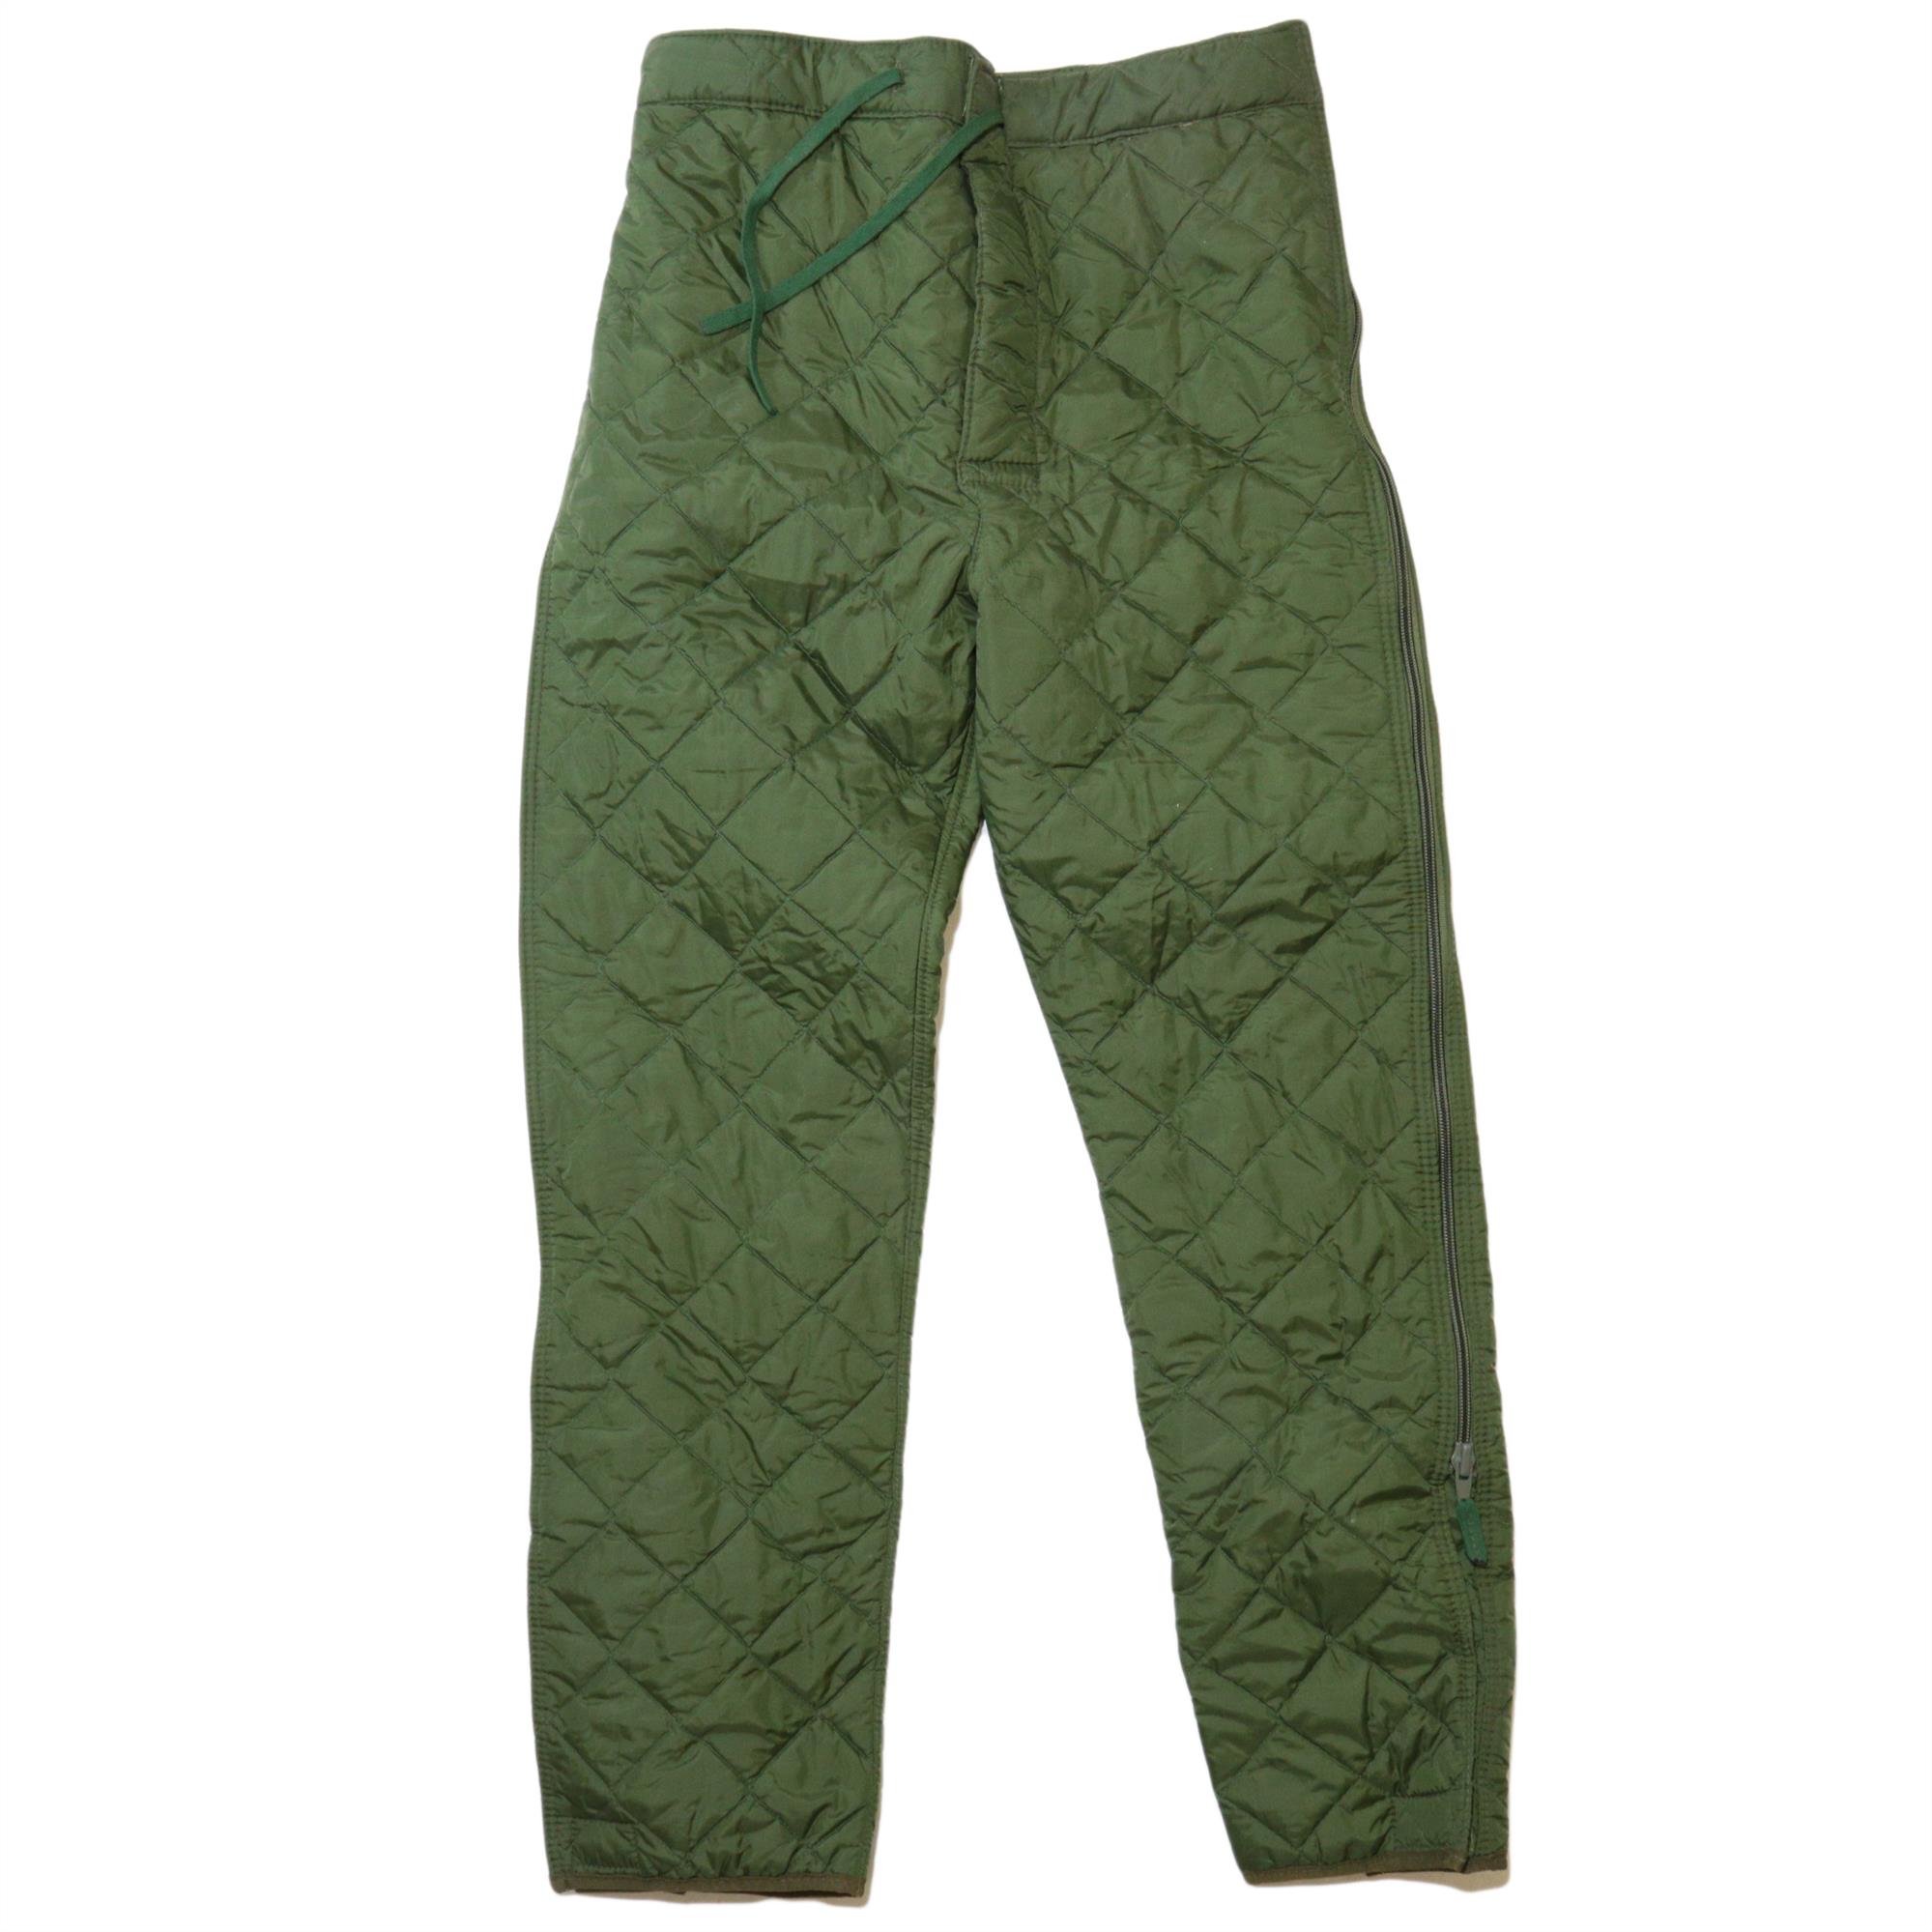 Genuine British Army Surplus Extreme Cold Weather Trouser Liner ...